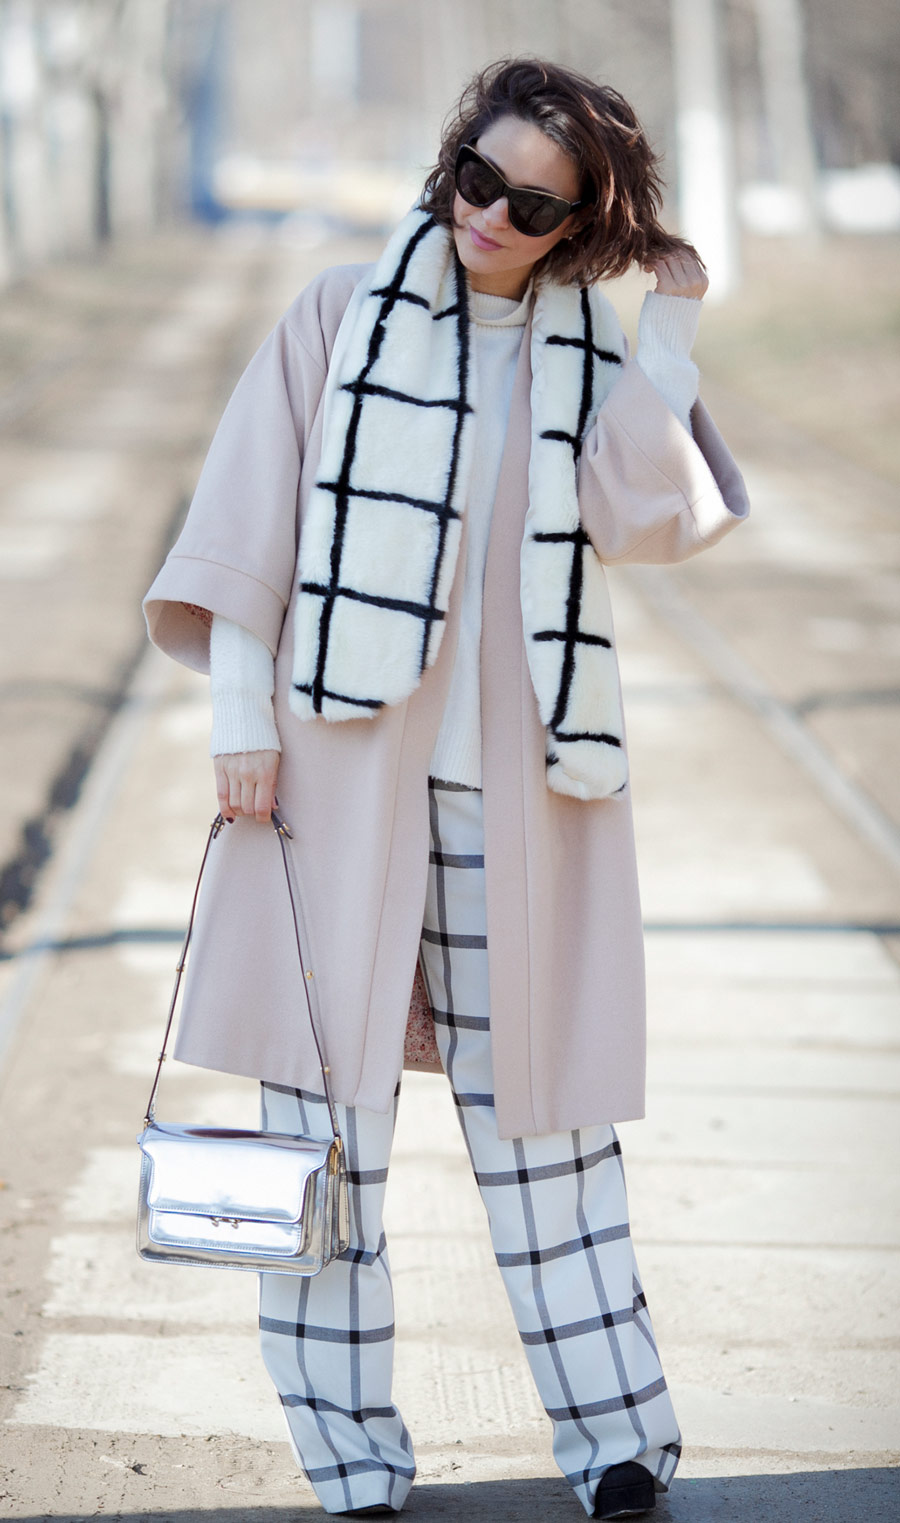 windowpane printed scarf, windowpane printed trousers outfits, metallic bag outfit, marni trunk bag outfit, feminine spring outfits, 